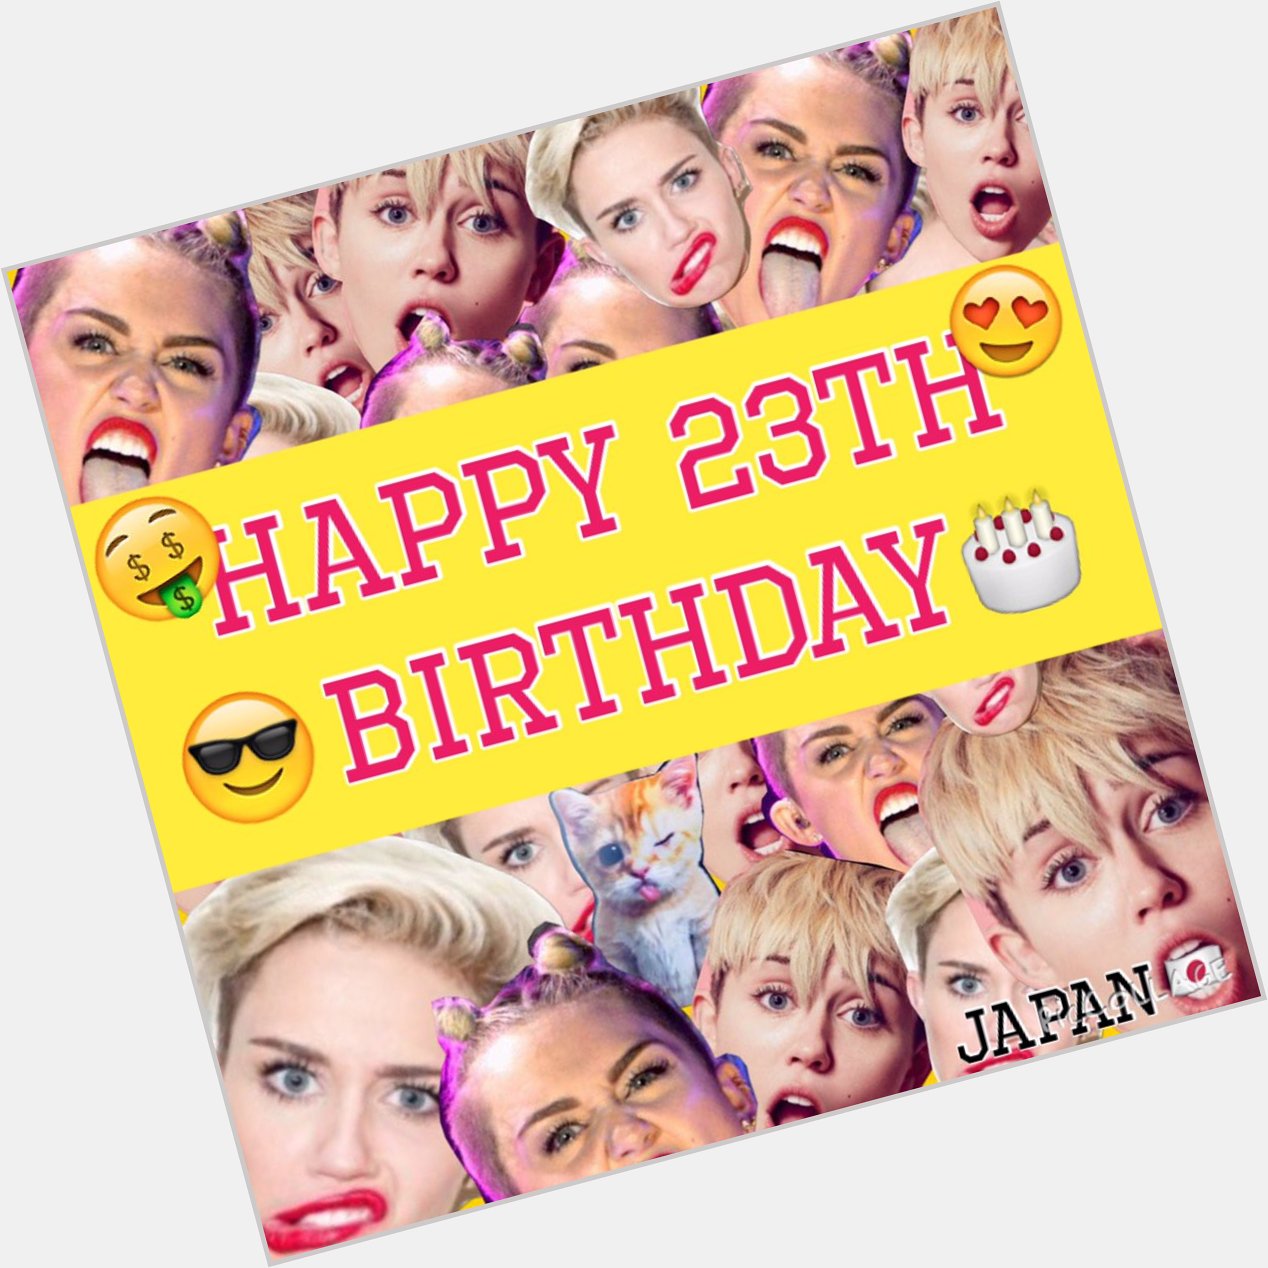 HAPPY BIRTHDAY     MILEY CYRUS     I love you more than anything in the world! 